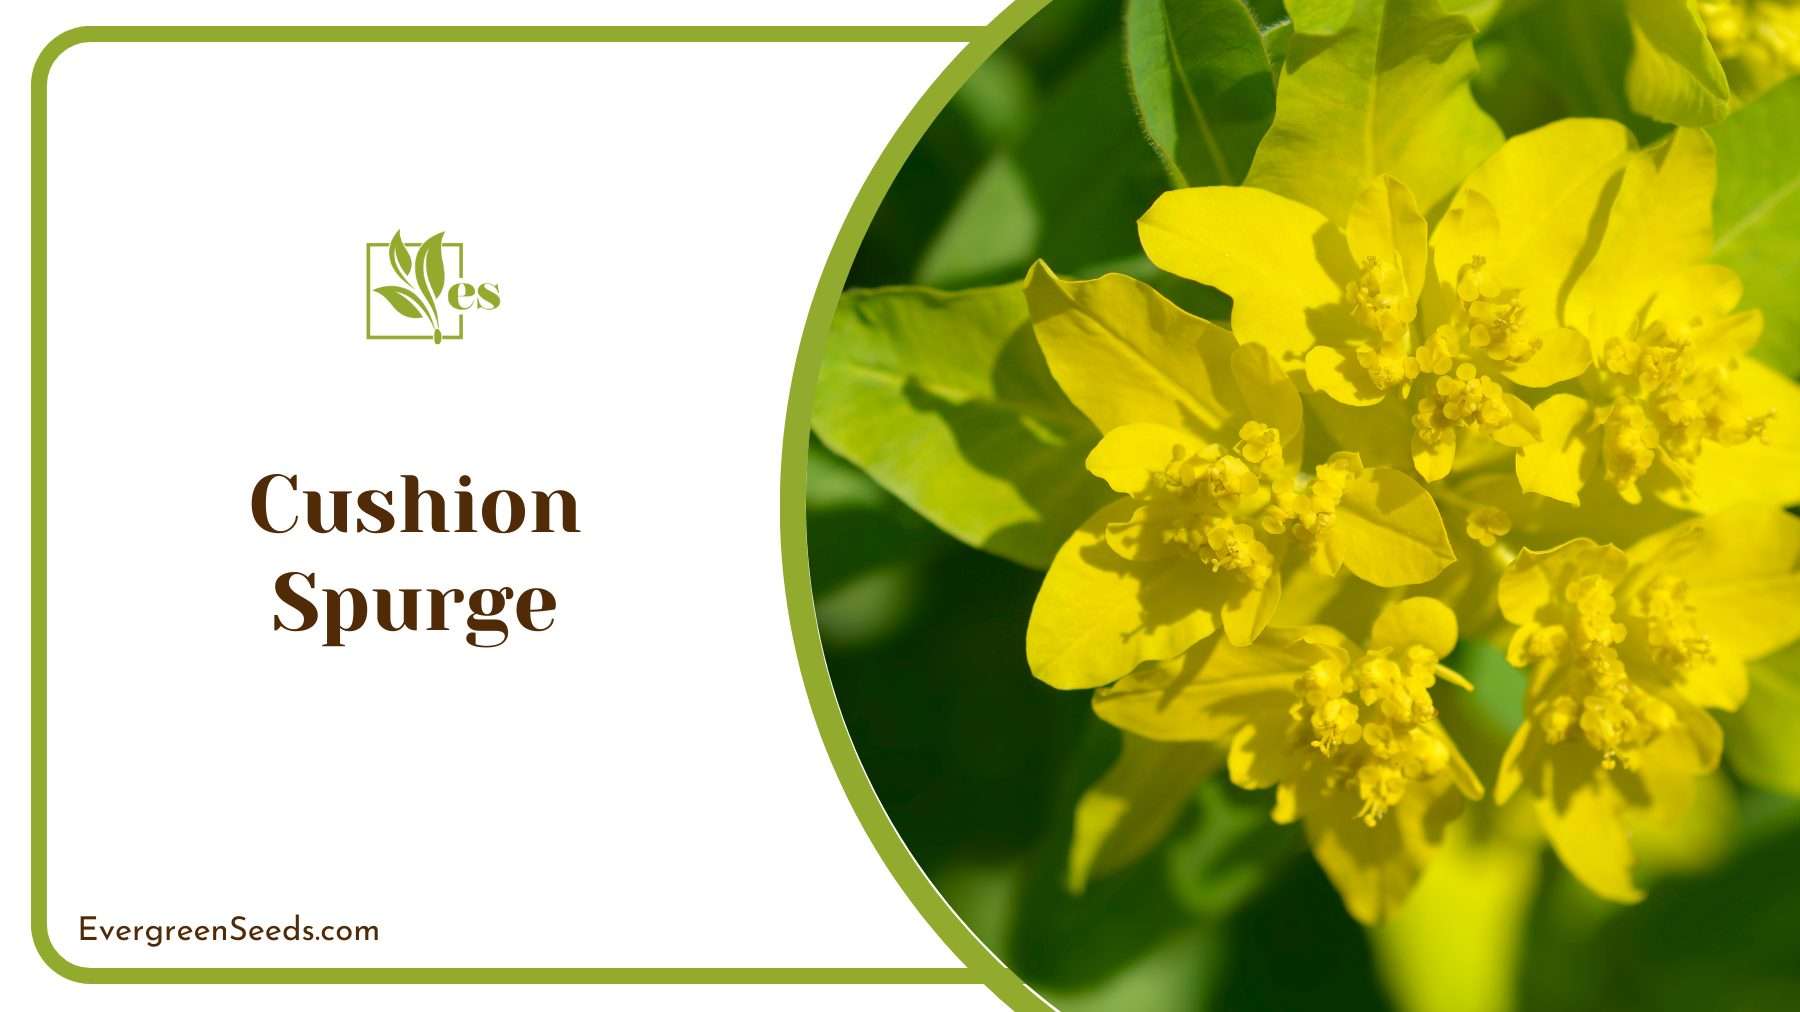 Cushion Spurge Vibrant Beauty And Drought Tolerance For Dry Gardens